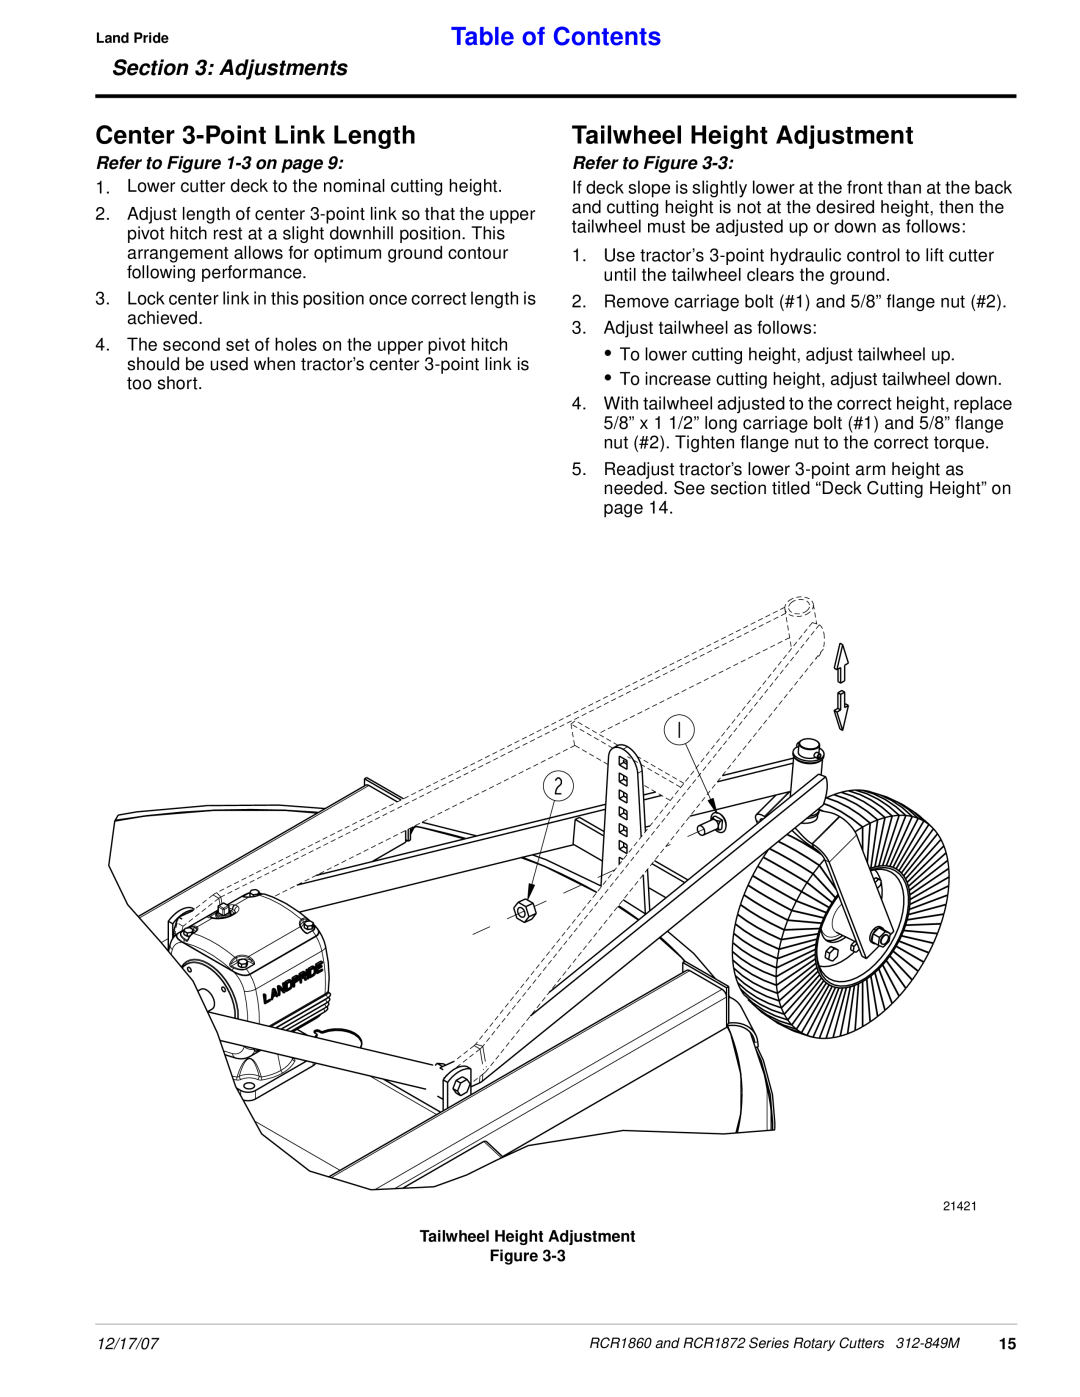 Land Pride RCR1872 manual Center 3-Point Link Length, Tailwheel Height Adjustment, Refer to -3 on page, Table of Contents 